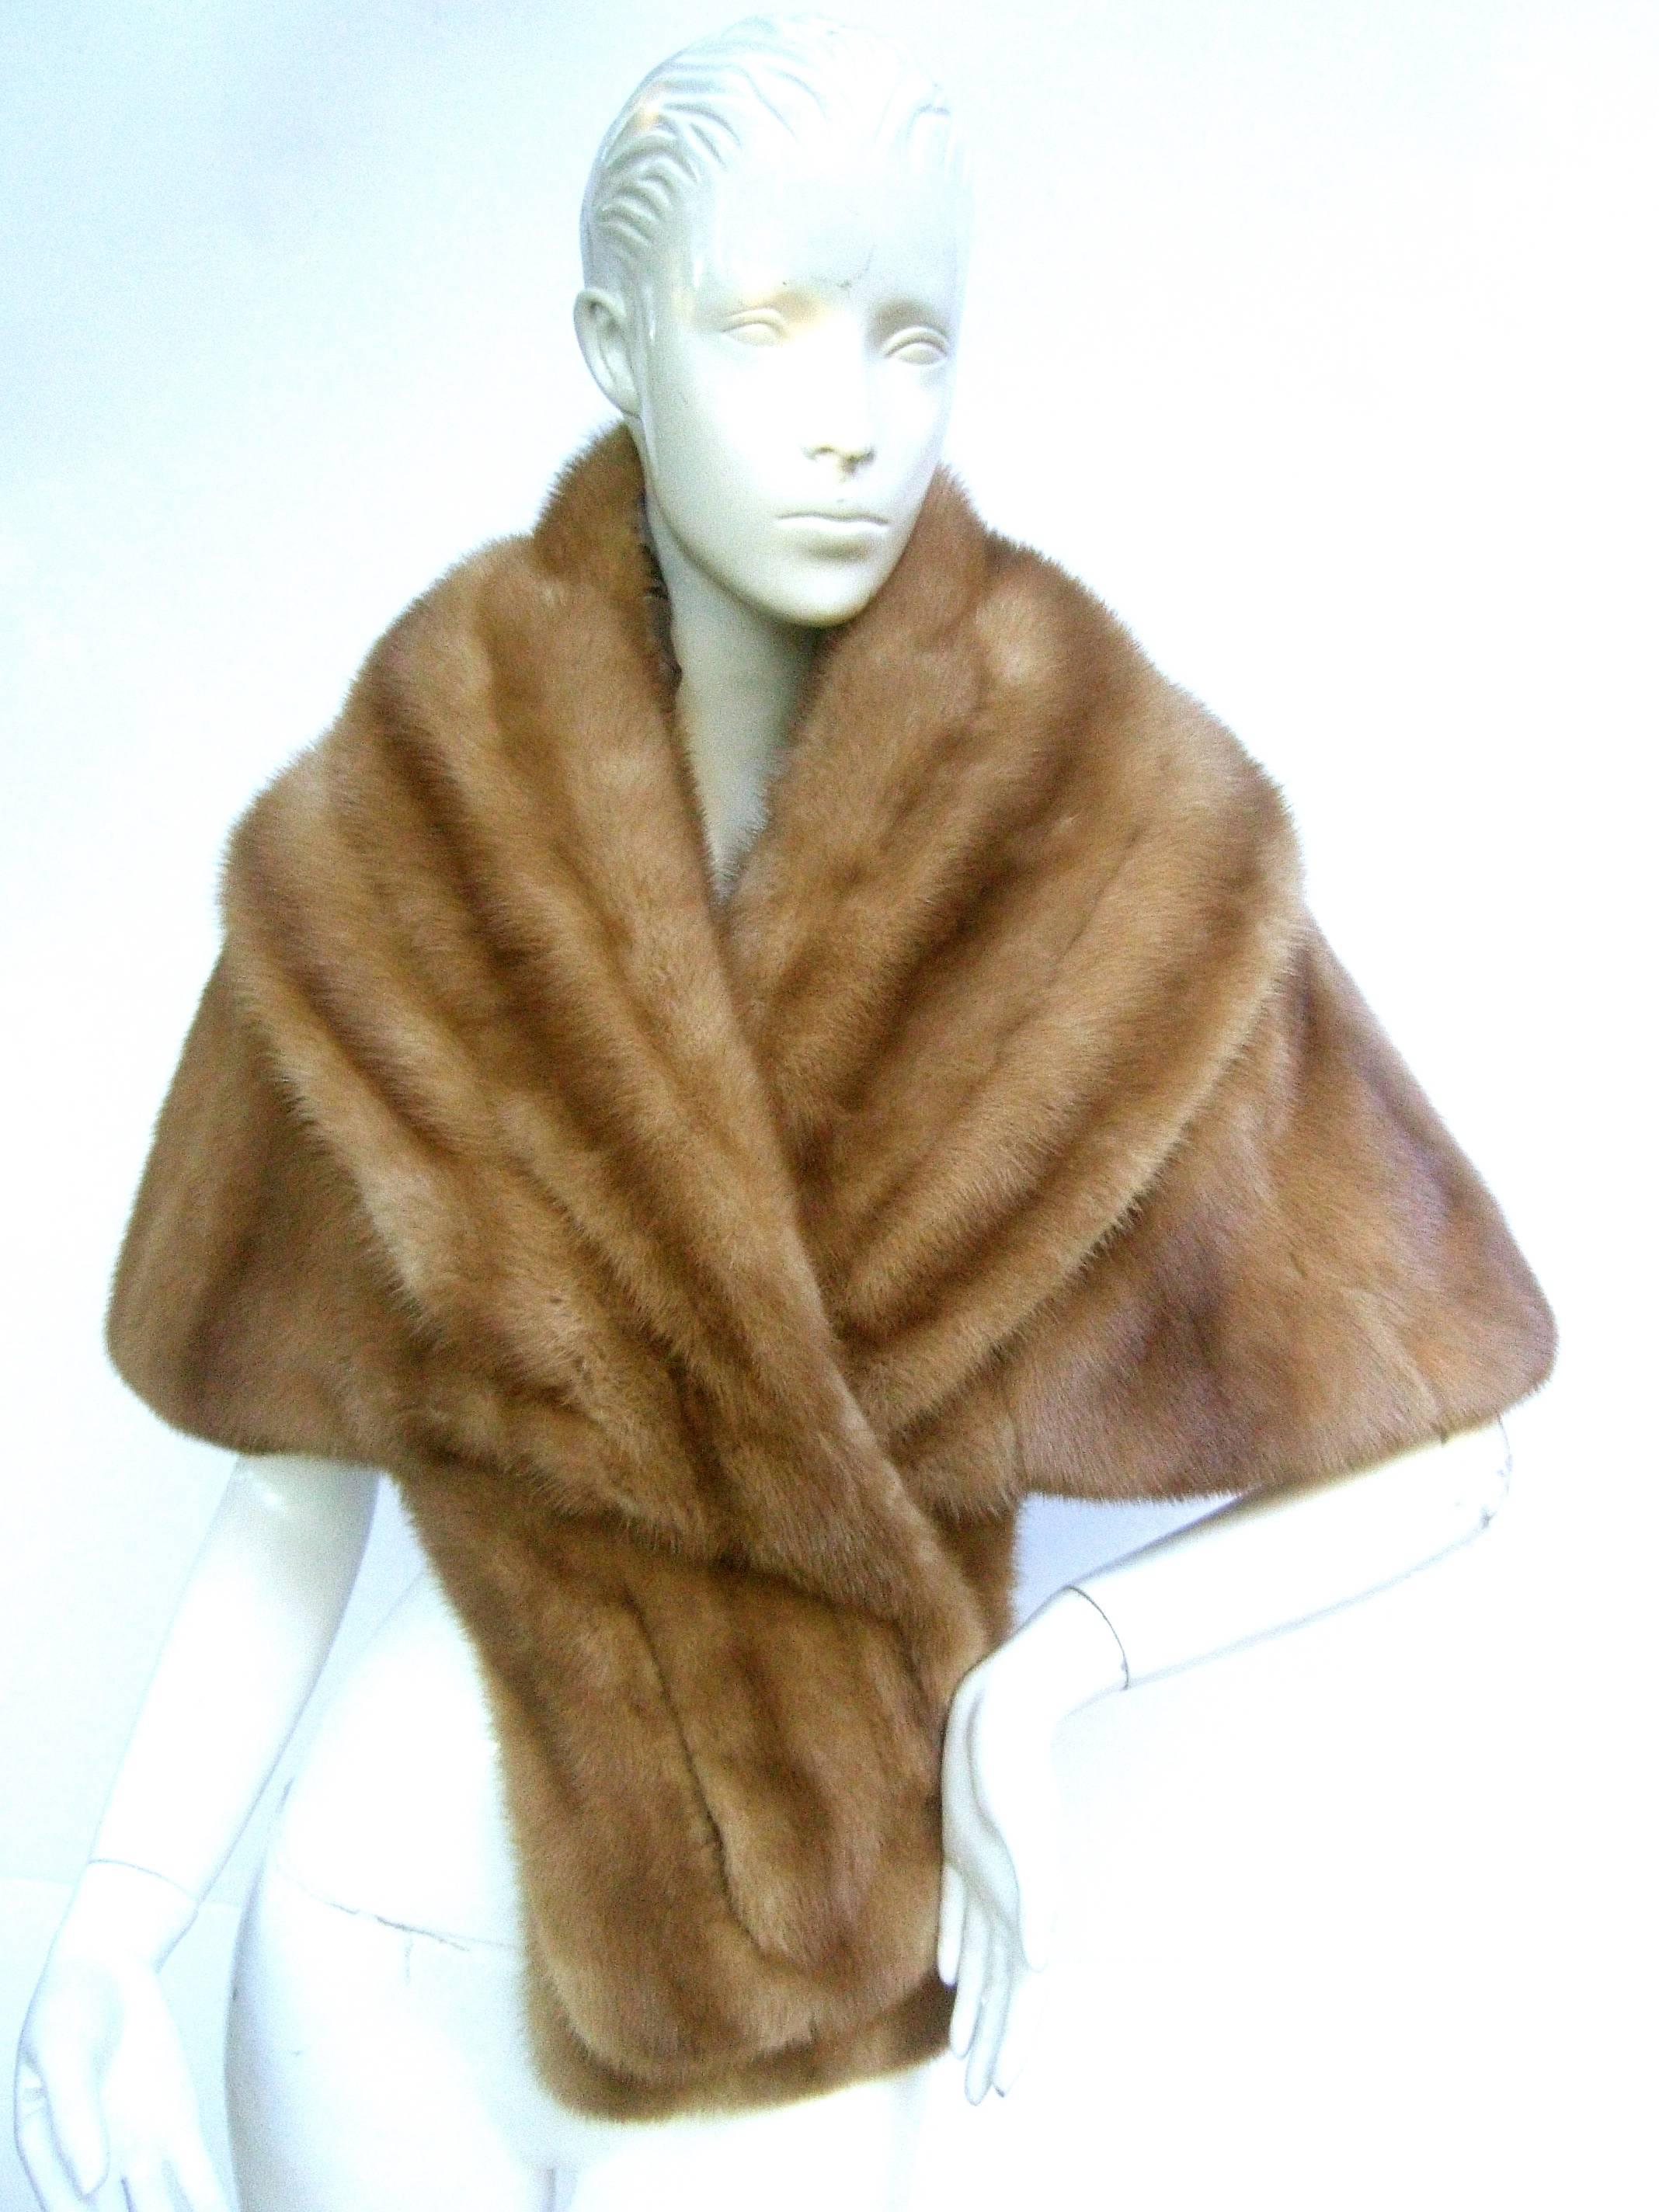 Schiaparelli Rare luxurious autumn haze mink stole c 1960s
The plush light brown mink stole is designed with 
sumptuous fur 

Lined in pewter tone satin illustrated with a collection
of chic midcentury style women in various fashions

Labeled